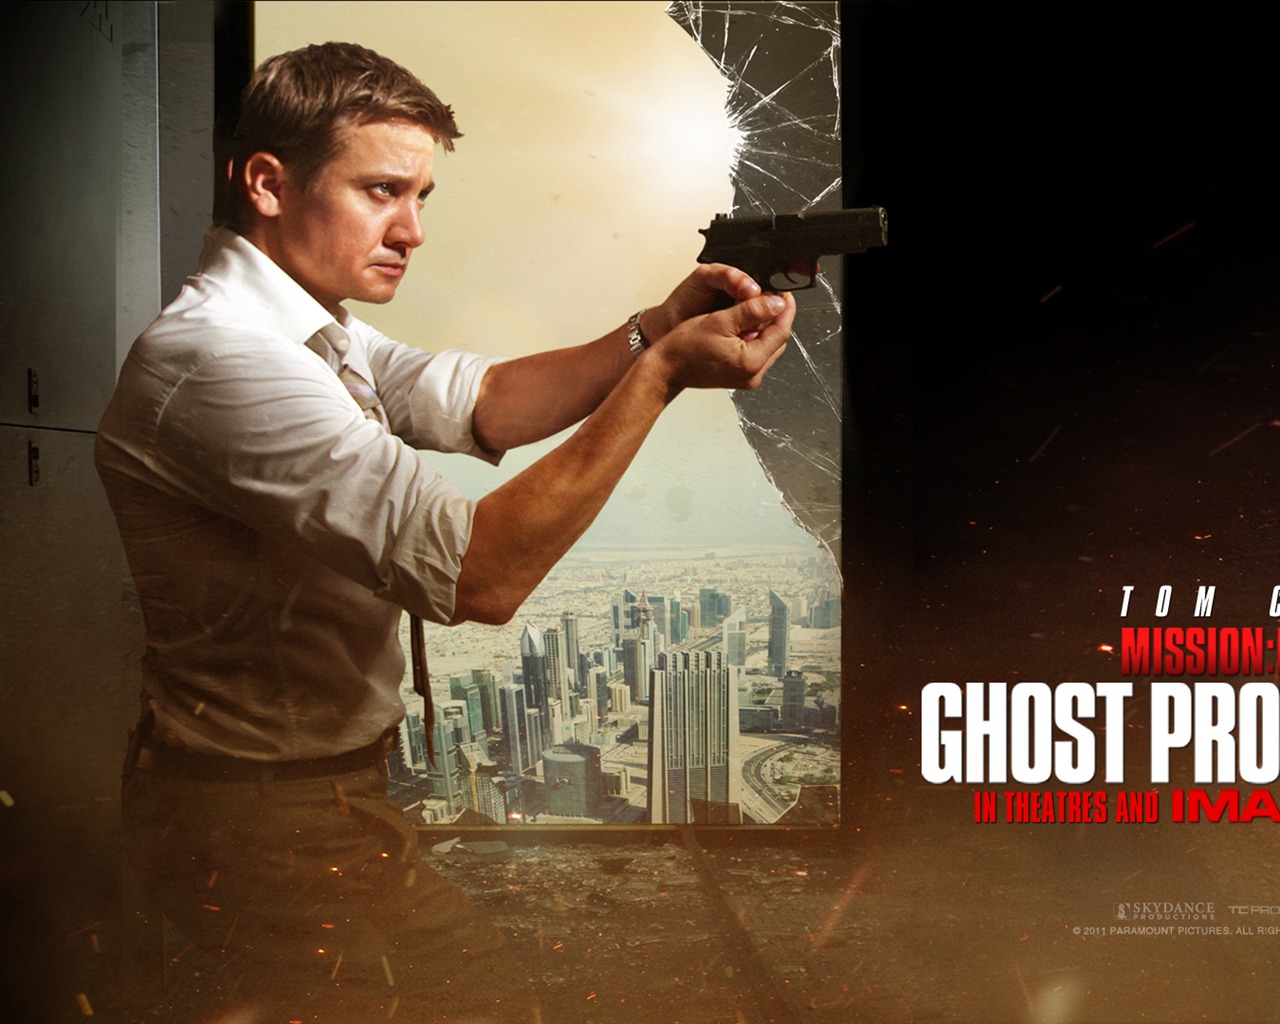 Mission: Impossible - Ghost Protocol wallpapers HD #2 - 1280x1024